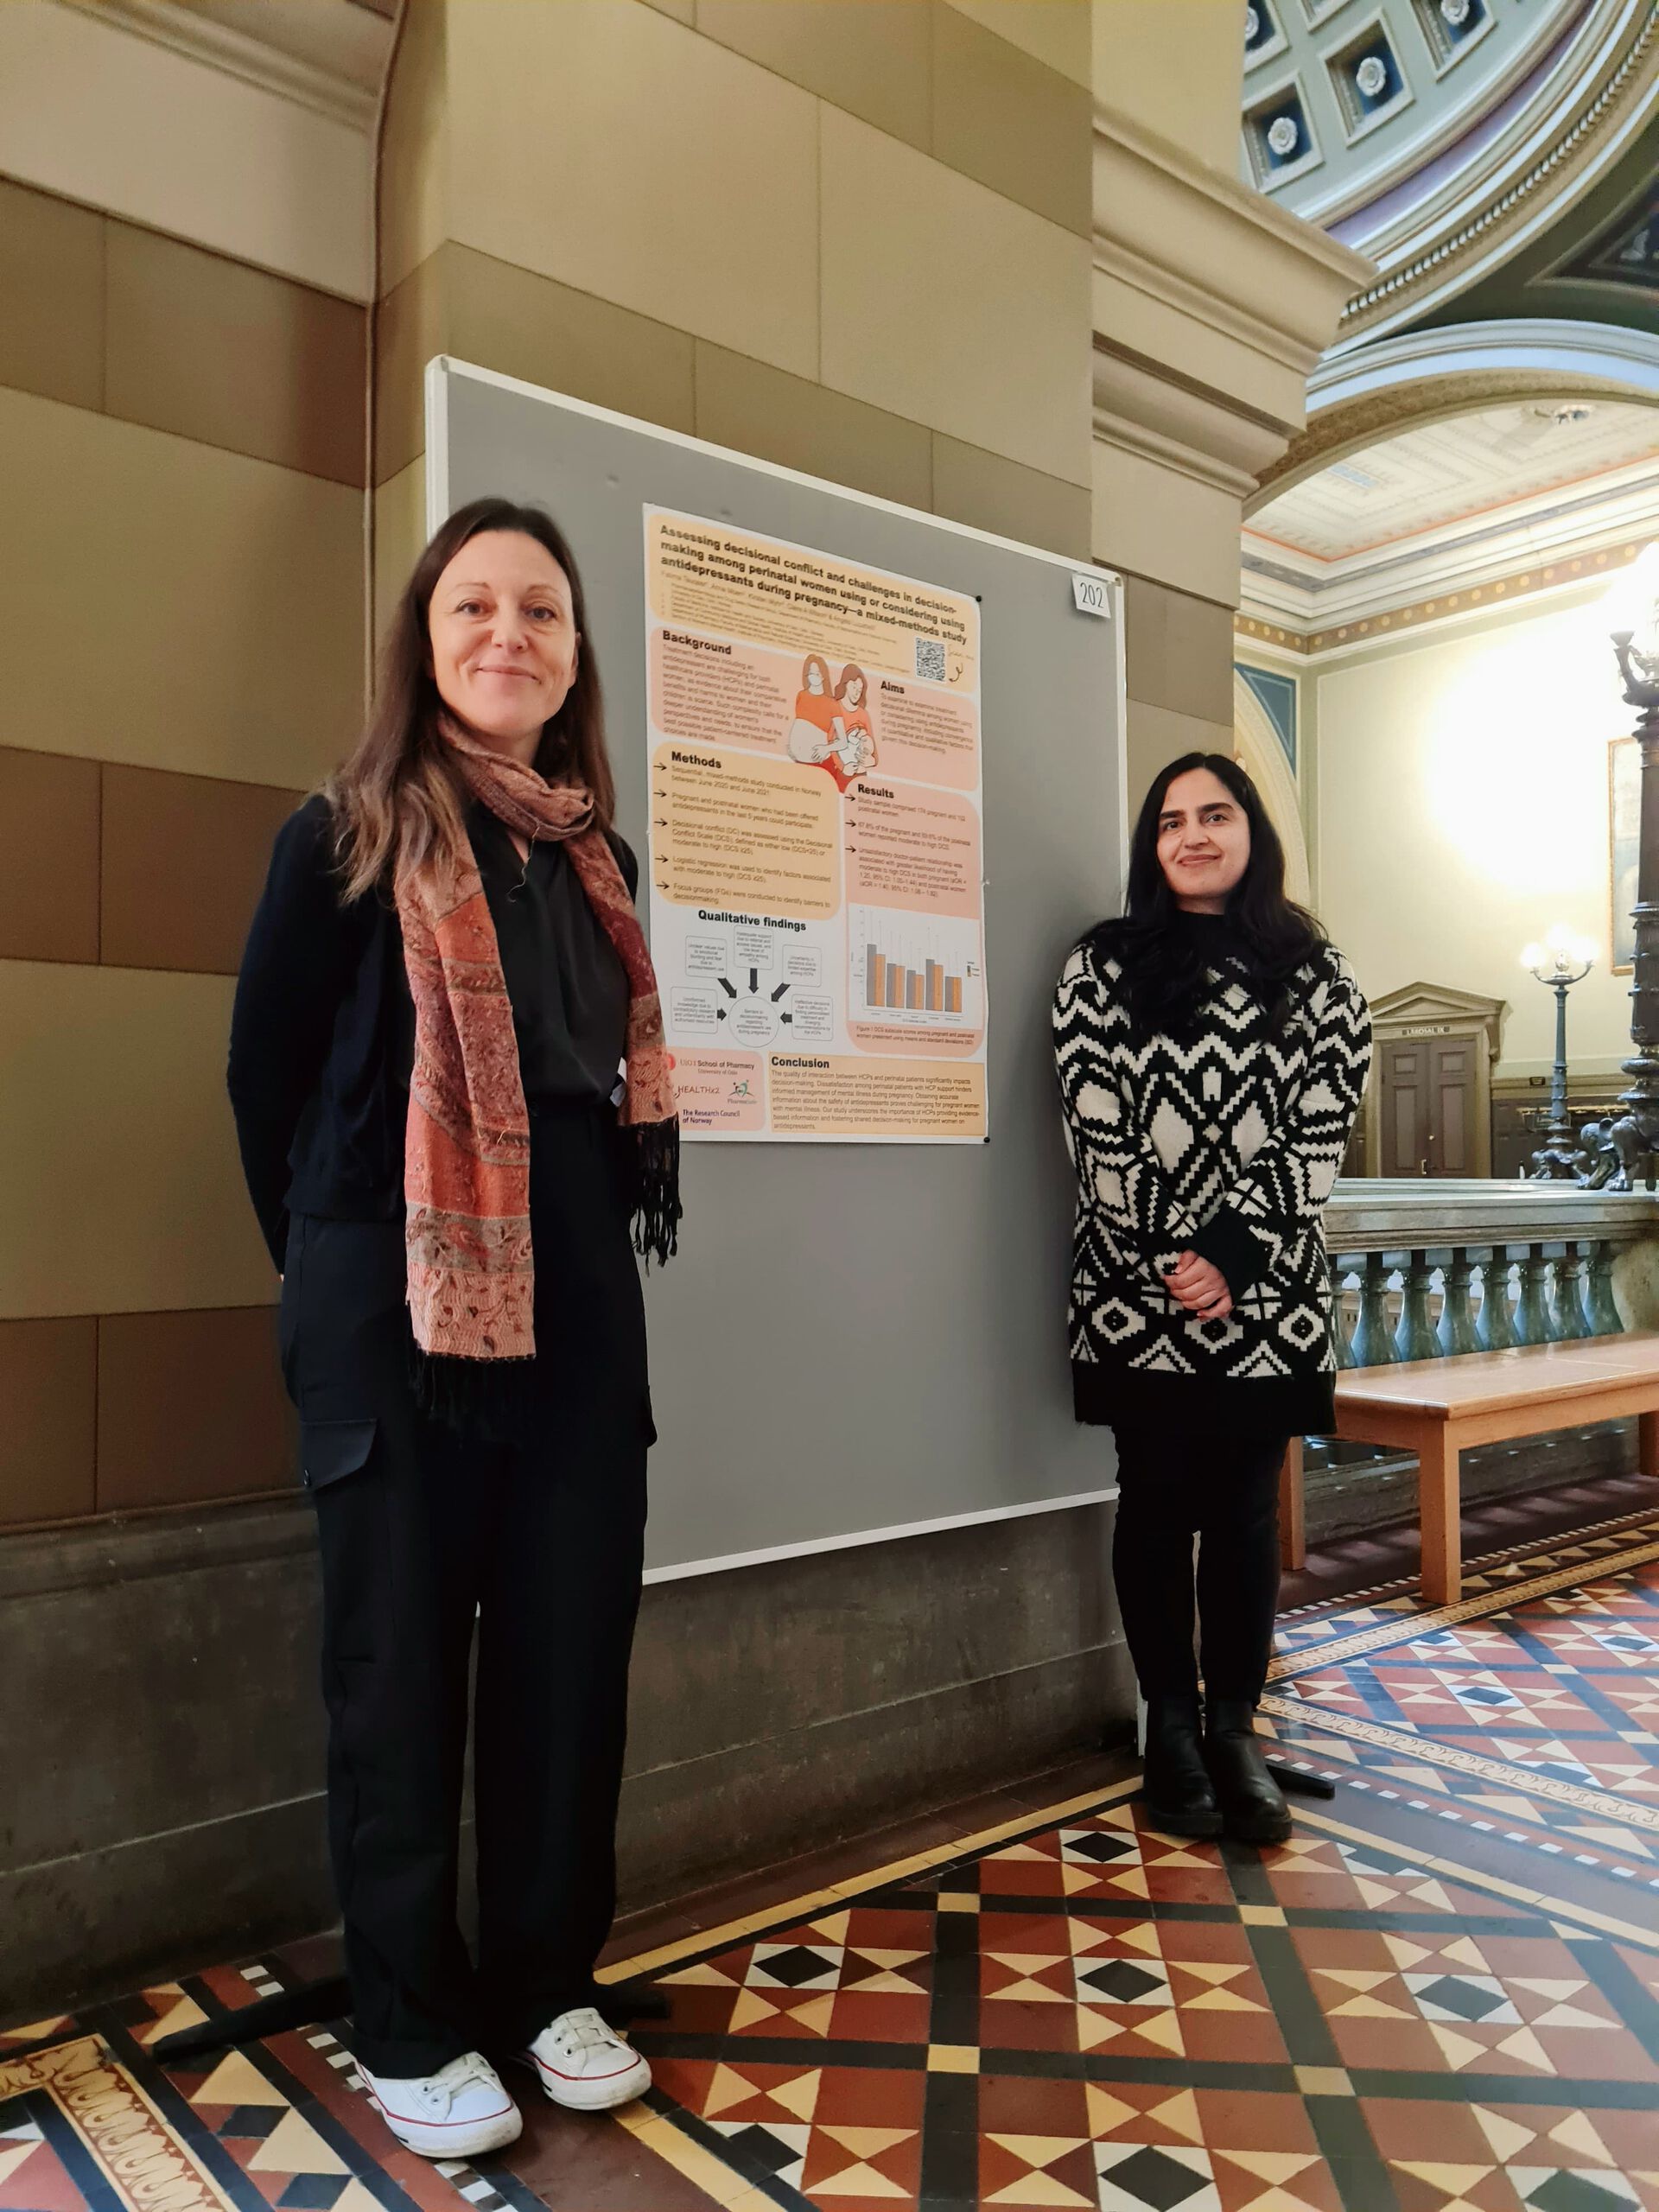 Two researchers in front of a poster